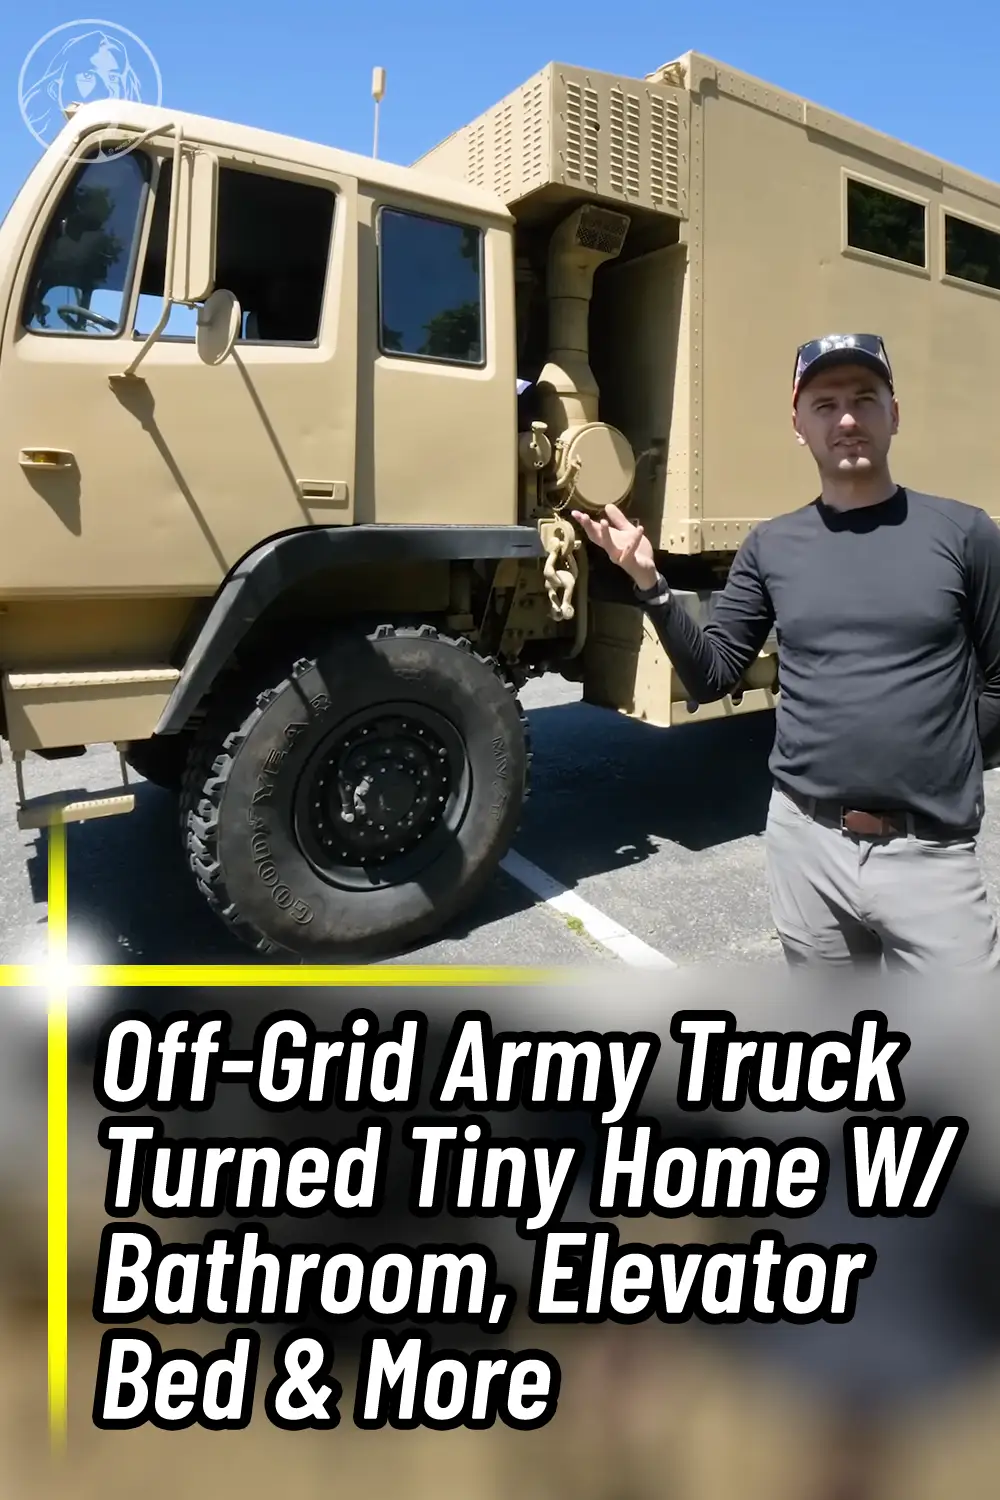 Off-Grid Army Truck Turned Tiny Home W/ Bathroom, Elevator Bed & More